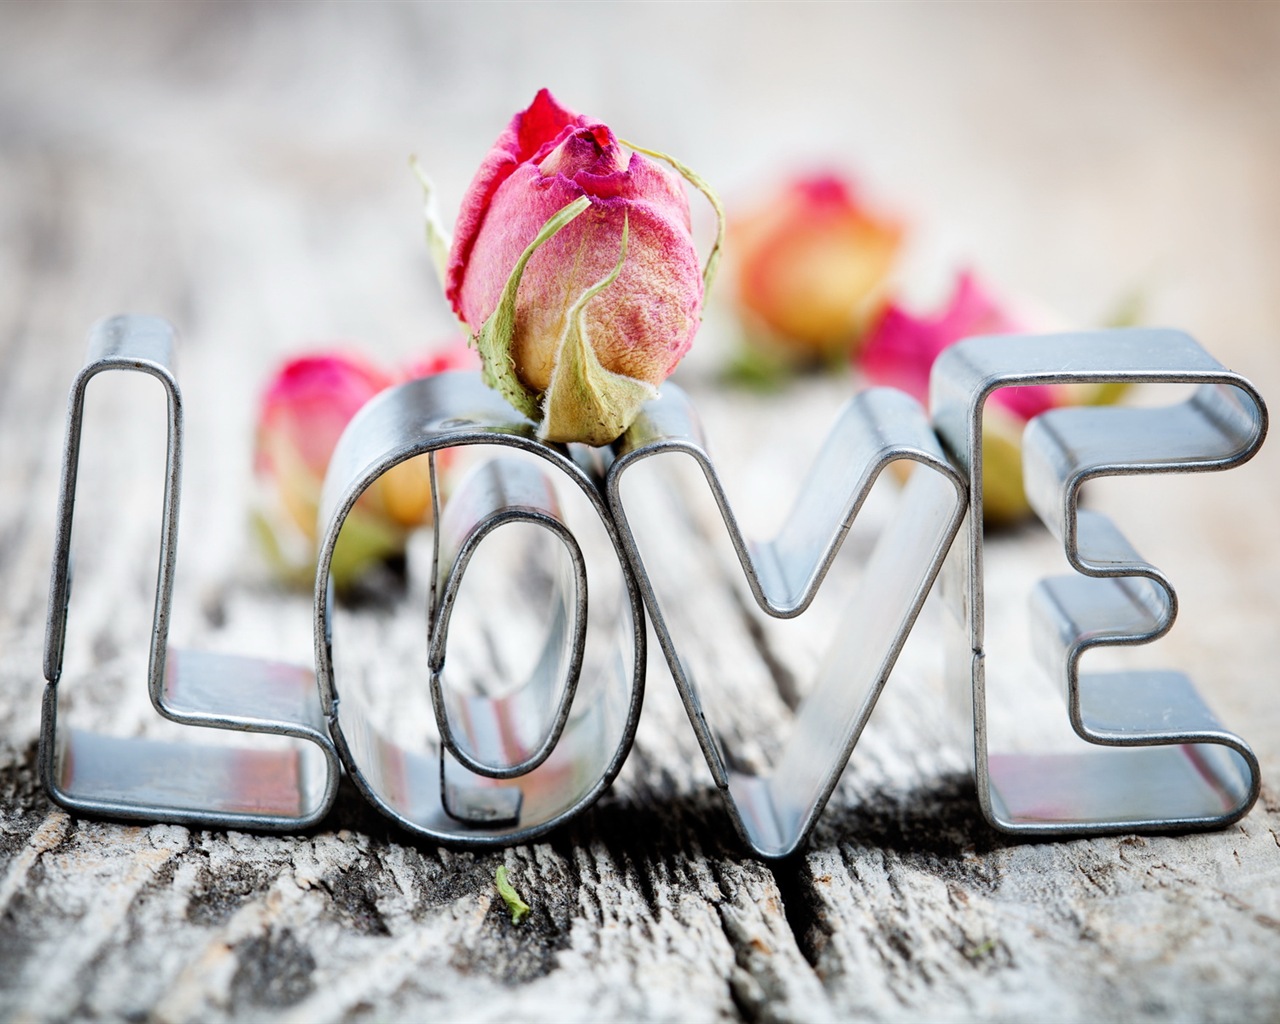 Warm and romantic Valentine's Day HD wallpapers #1 - 1280x1024